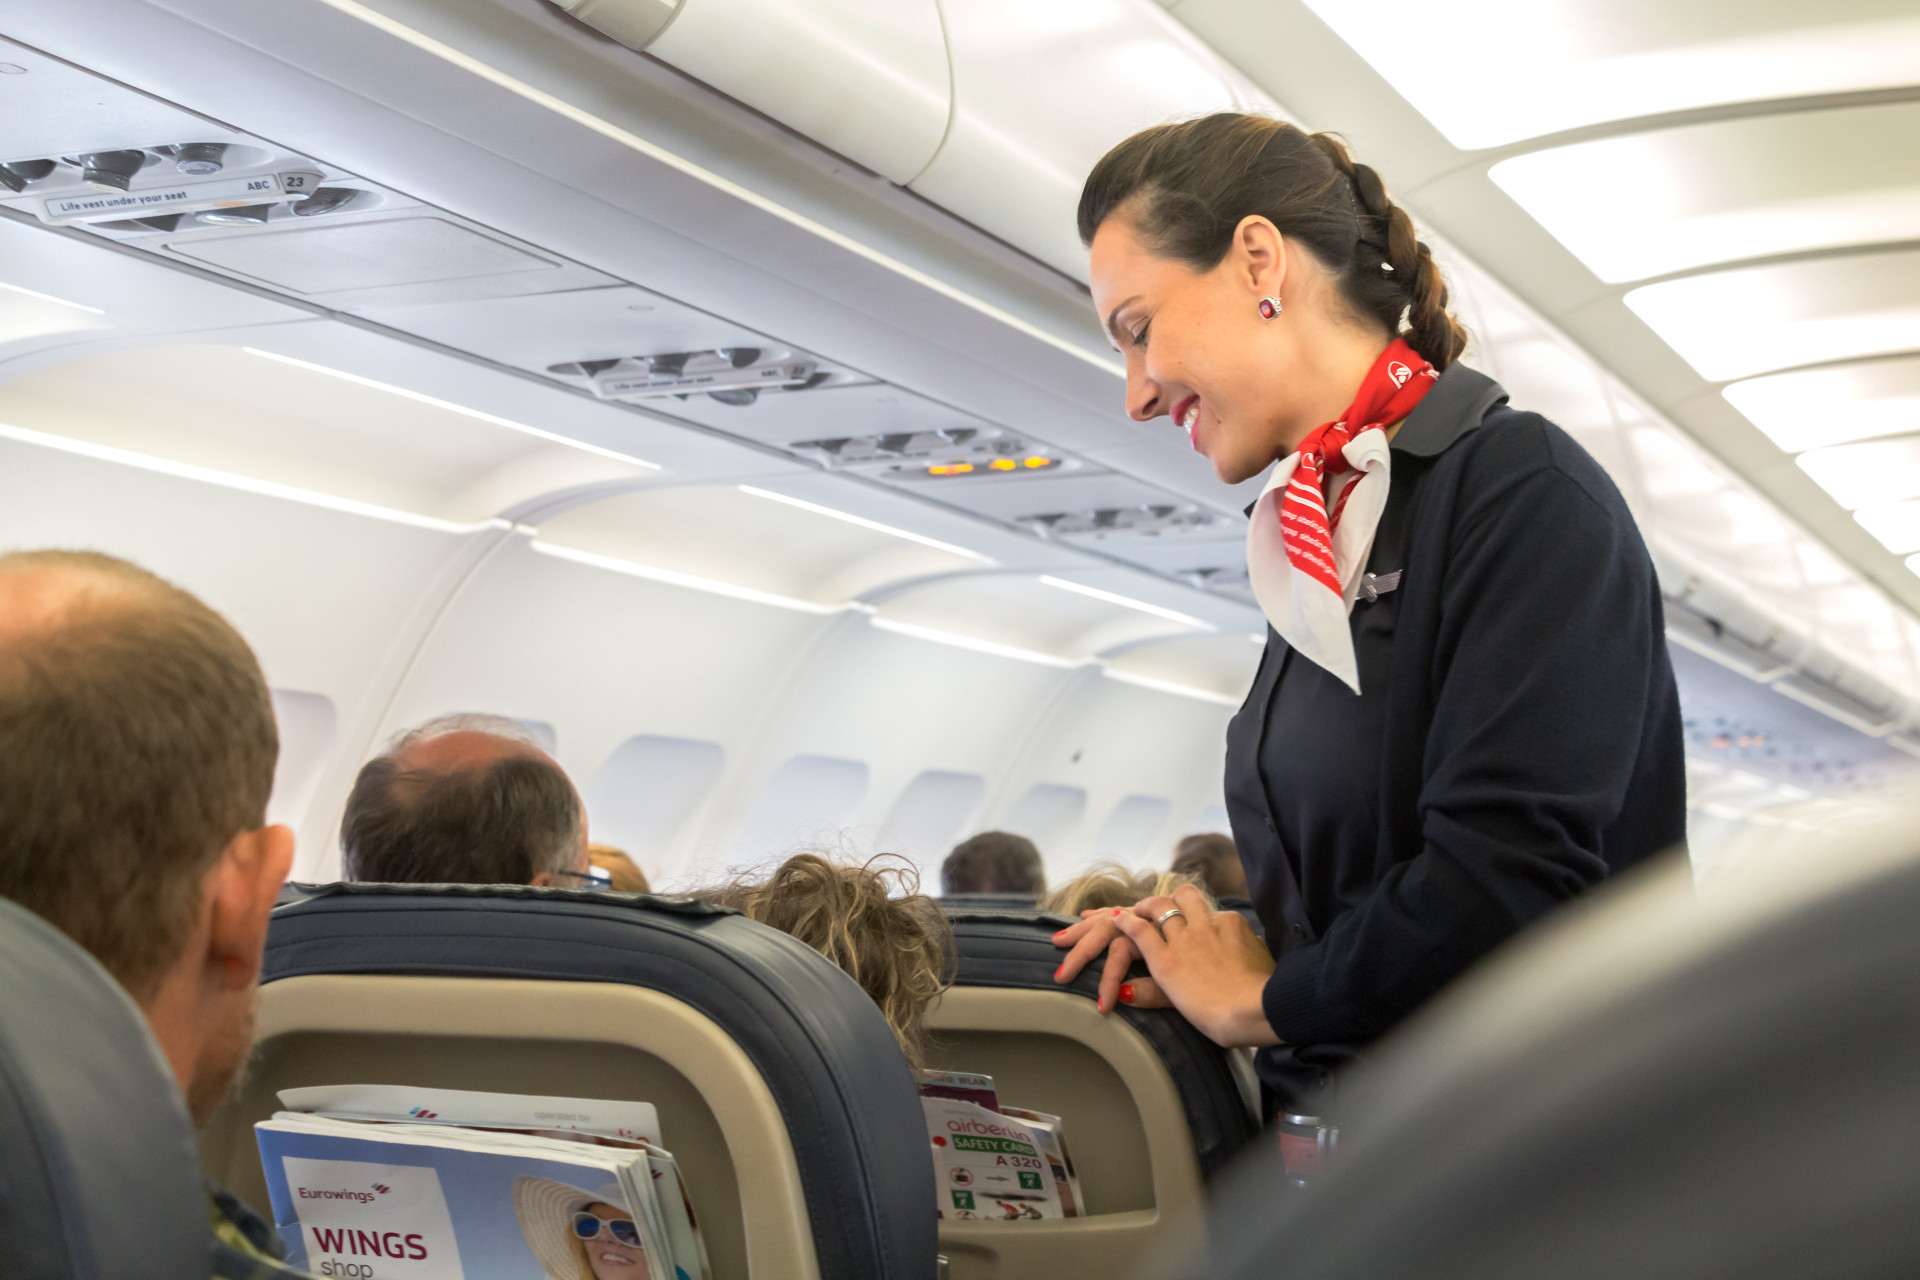 Wages vary immensely depending on the airlines, as low-cost ones pay much less than mid-range or luxury ones, and also how many hours they fly. Flight attendants can earn anywhere between US$25,000 and US$80,000 a year!<p>You may also like:<a href="https://www.starsinsider.com/n/452467?utm_source=msn.com&utm_medium=display&utm_campaign=referral_description&utm_content=240533v6en-in"> Hollywood stars and their first R-rated movies</a></p>